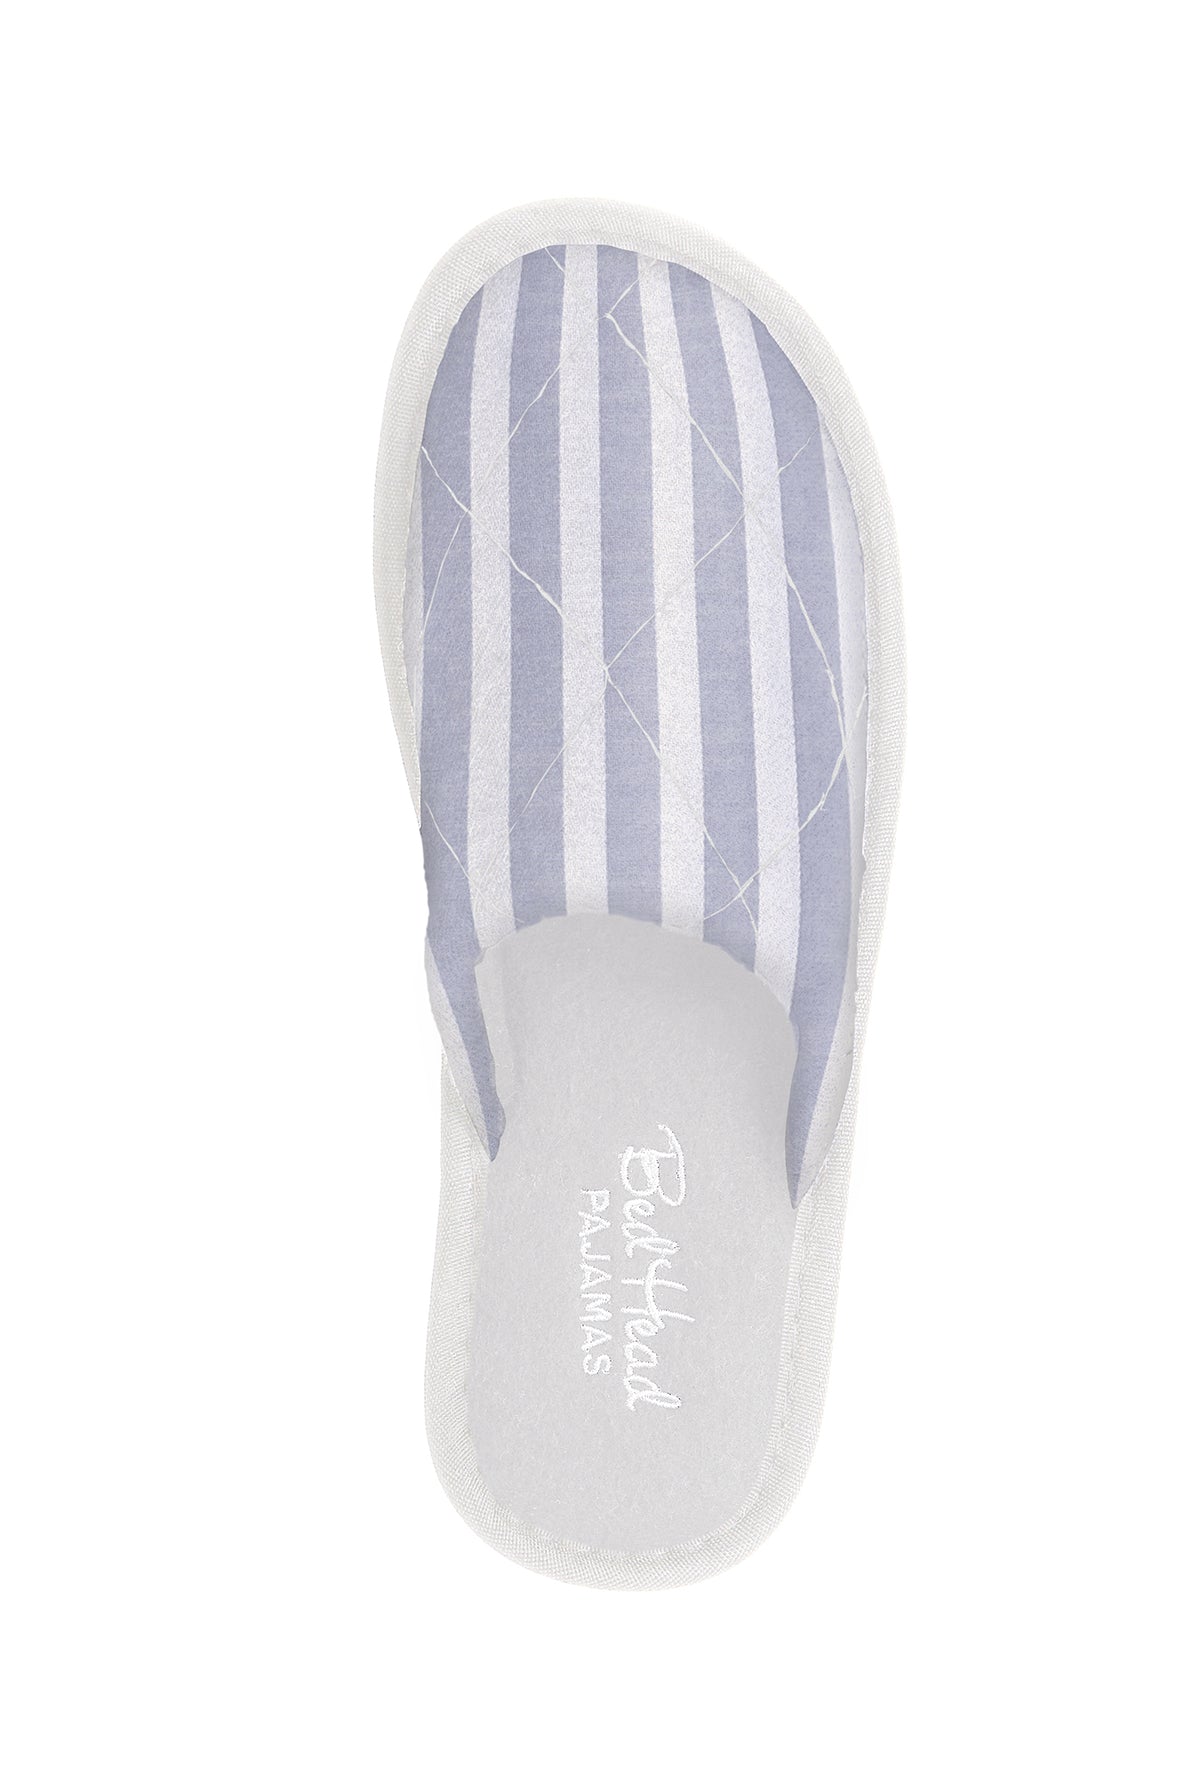 Blue 3D Stripe French Terry Lined Woven Cotton Unisex Slippers